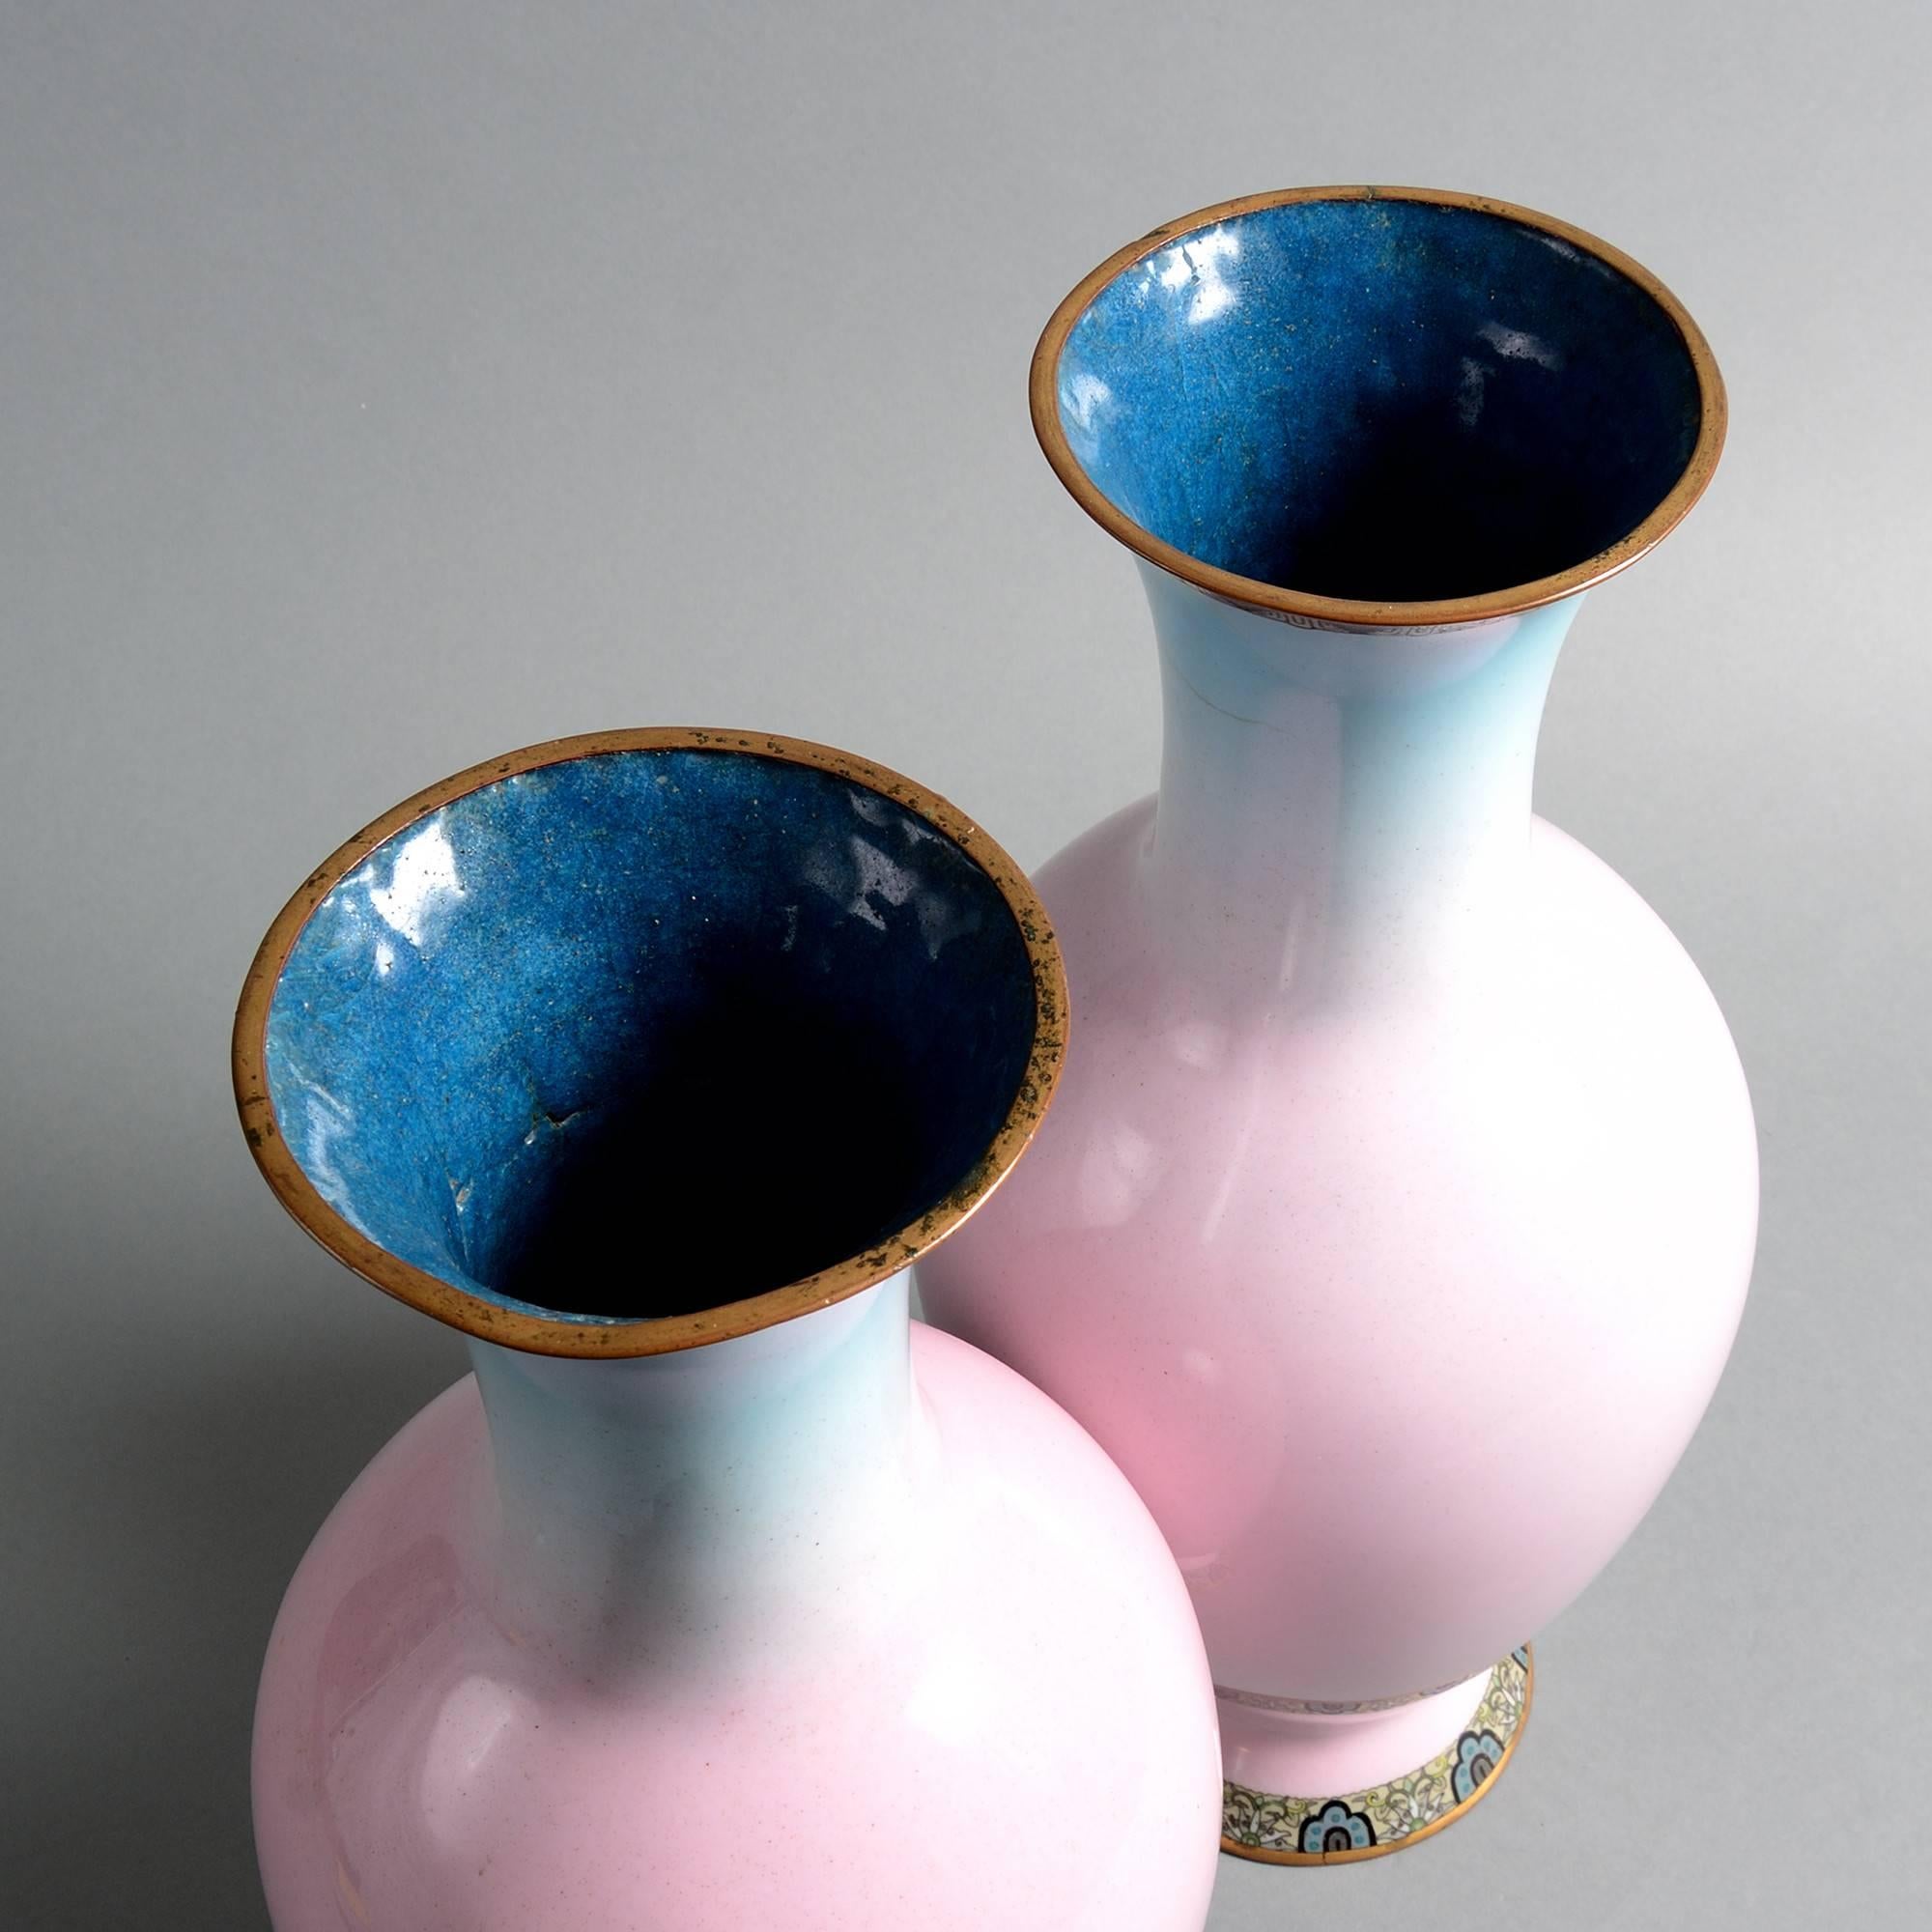 A fine late 19th century pair of cloisonné baluster form vases, enameled with soft blue and pink and set upon an intricately decorated foot.